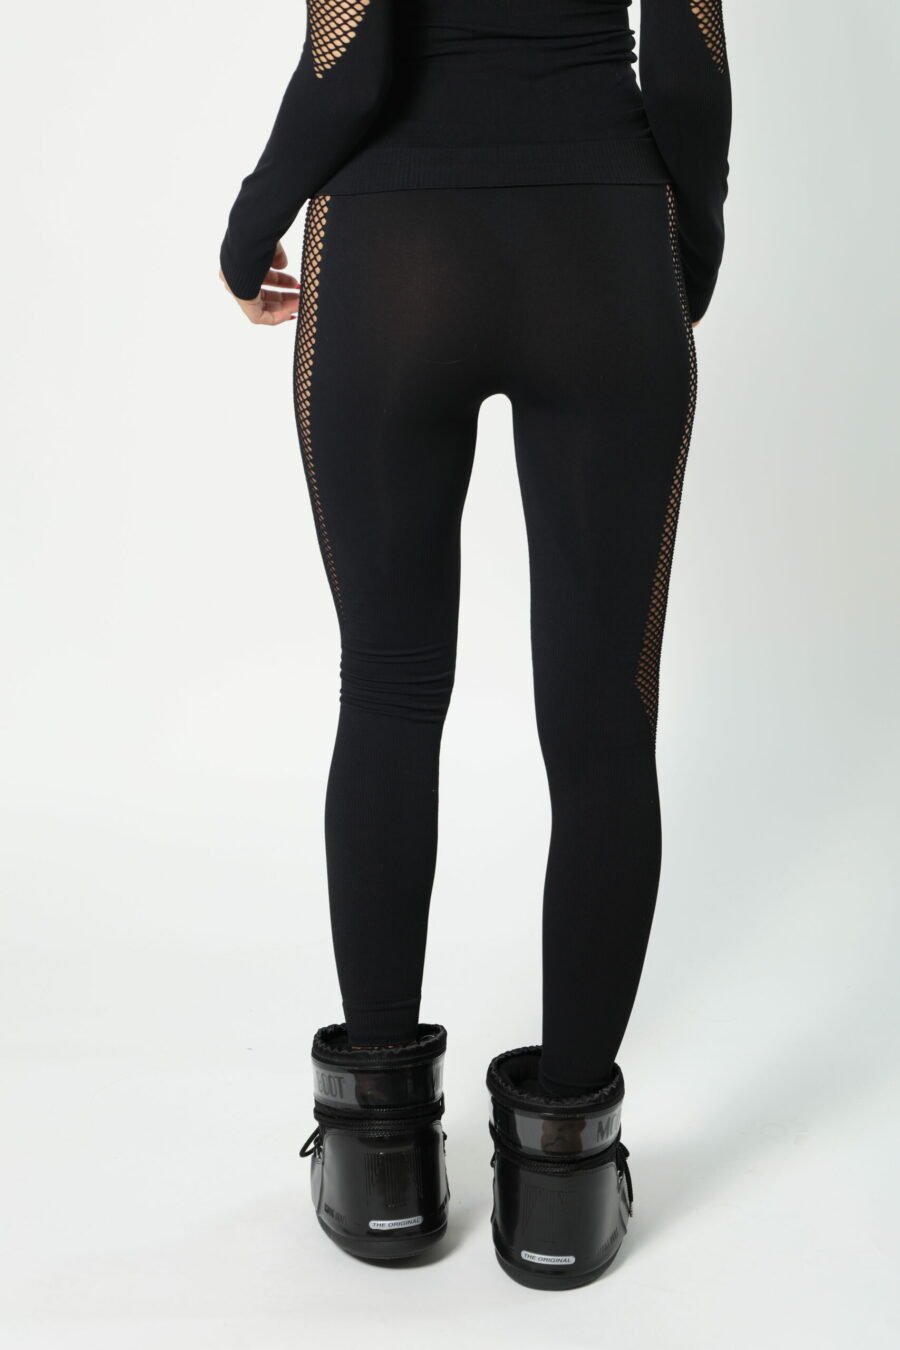 Black leggings with logo and side mesh - 8052865435499 497 scaled